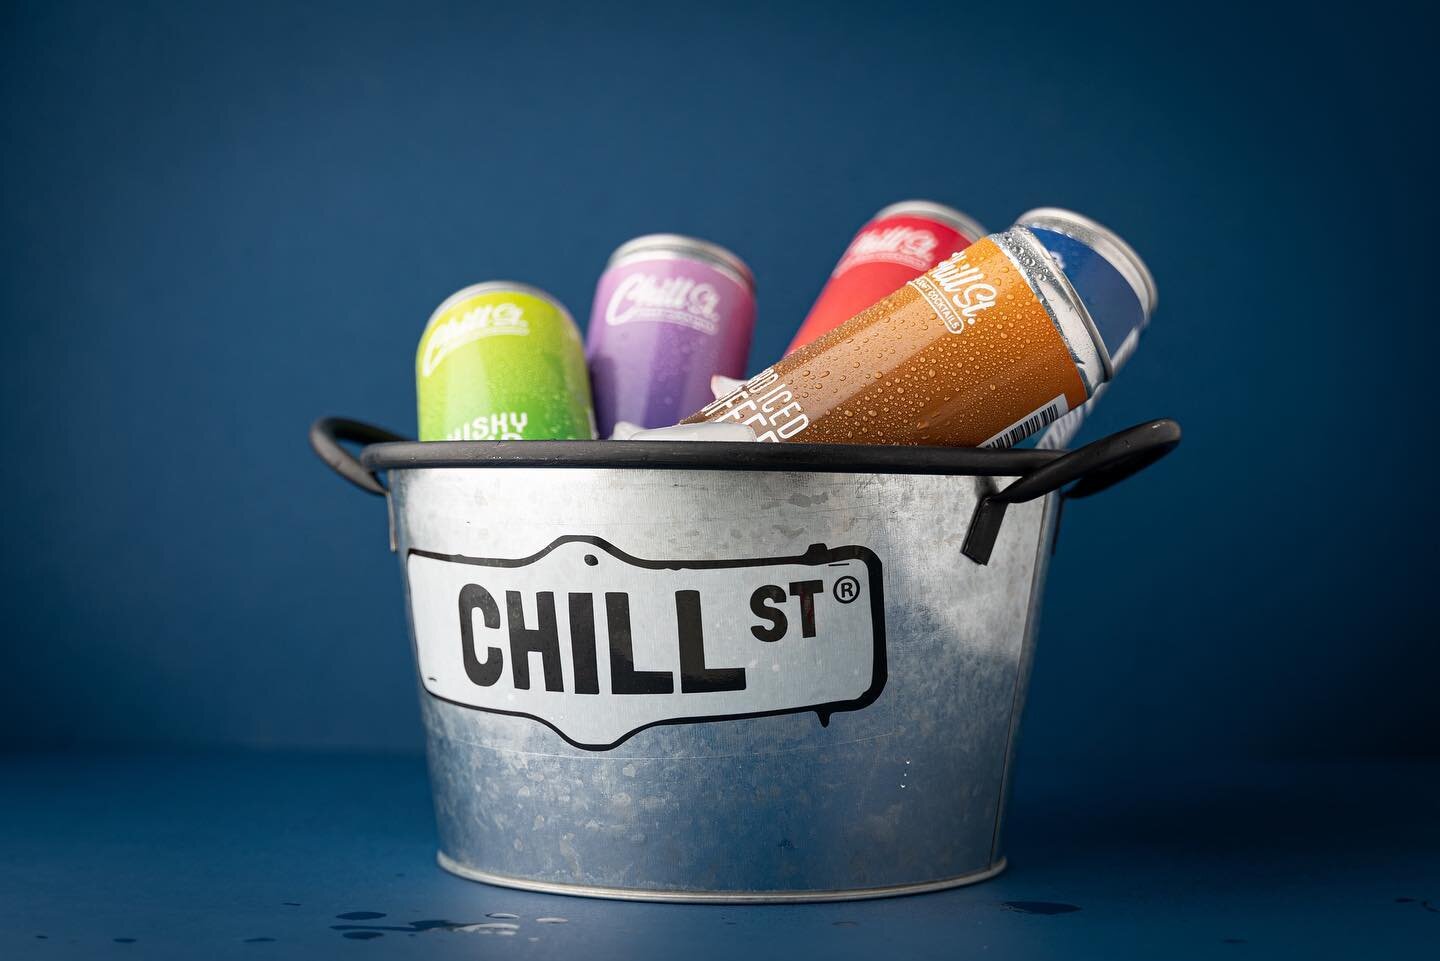 ✨NEW PRODUCT ALERT✨

We are now carrying @chillstreetcraftbevco buckets at the Peg! Hosting a wedding or an event at the Peg and want to have these available for your guests? Just let us know! Also makes a fun alternative to table wine! There are eig